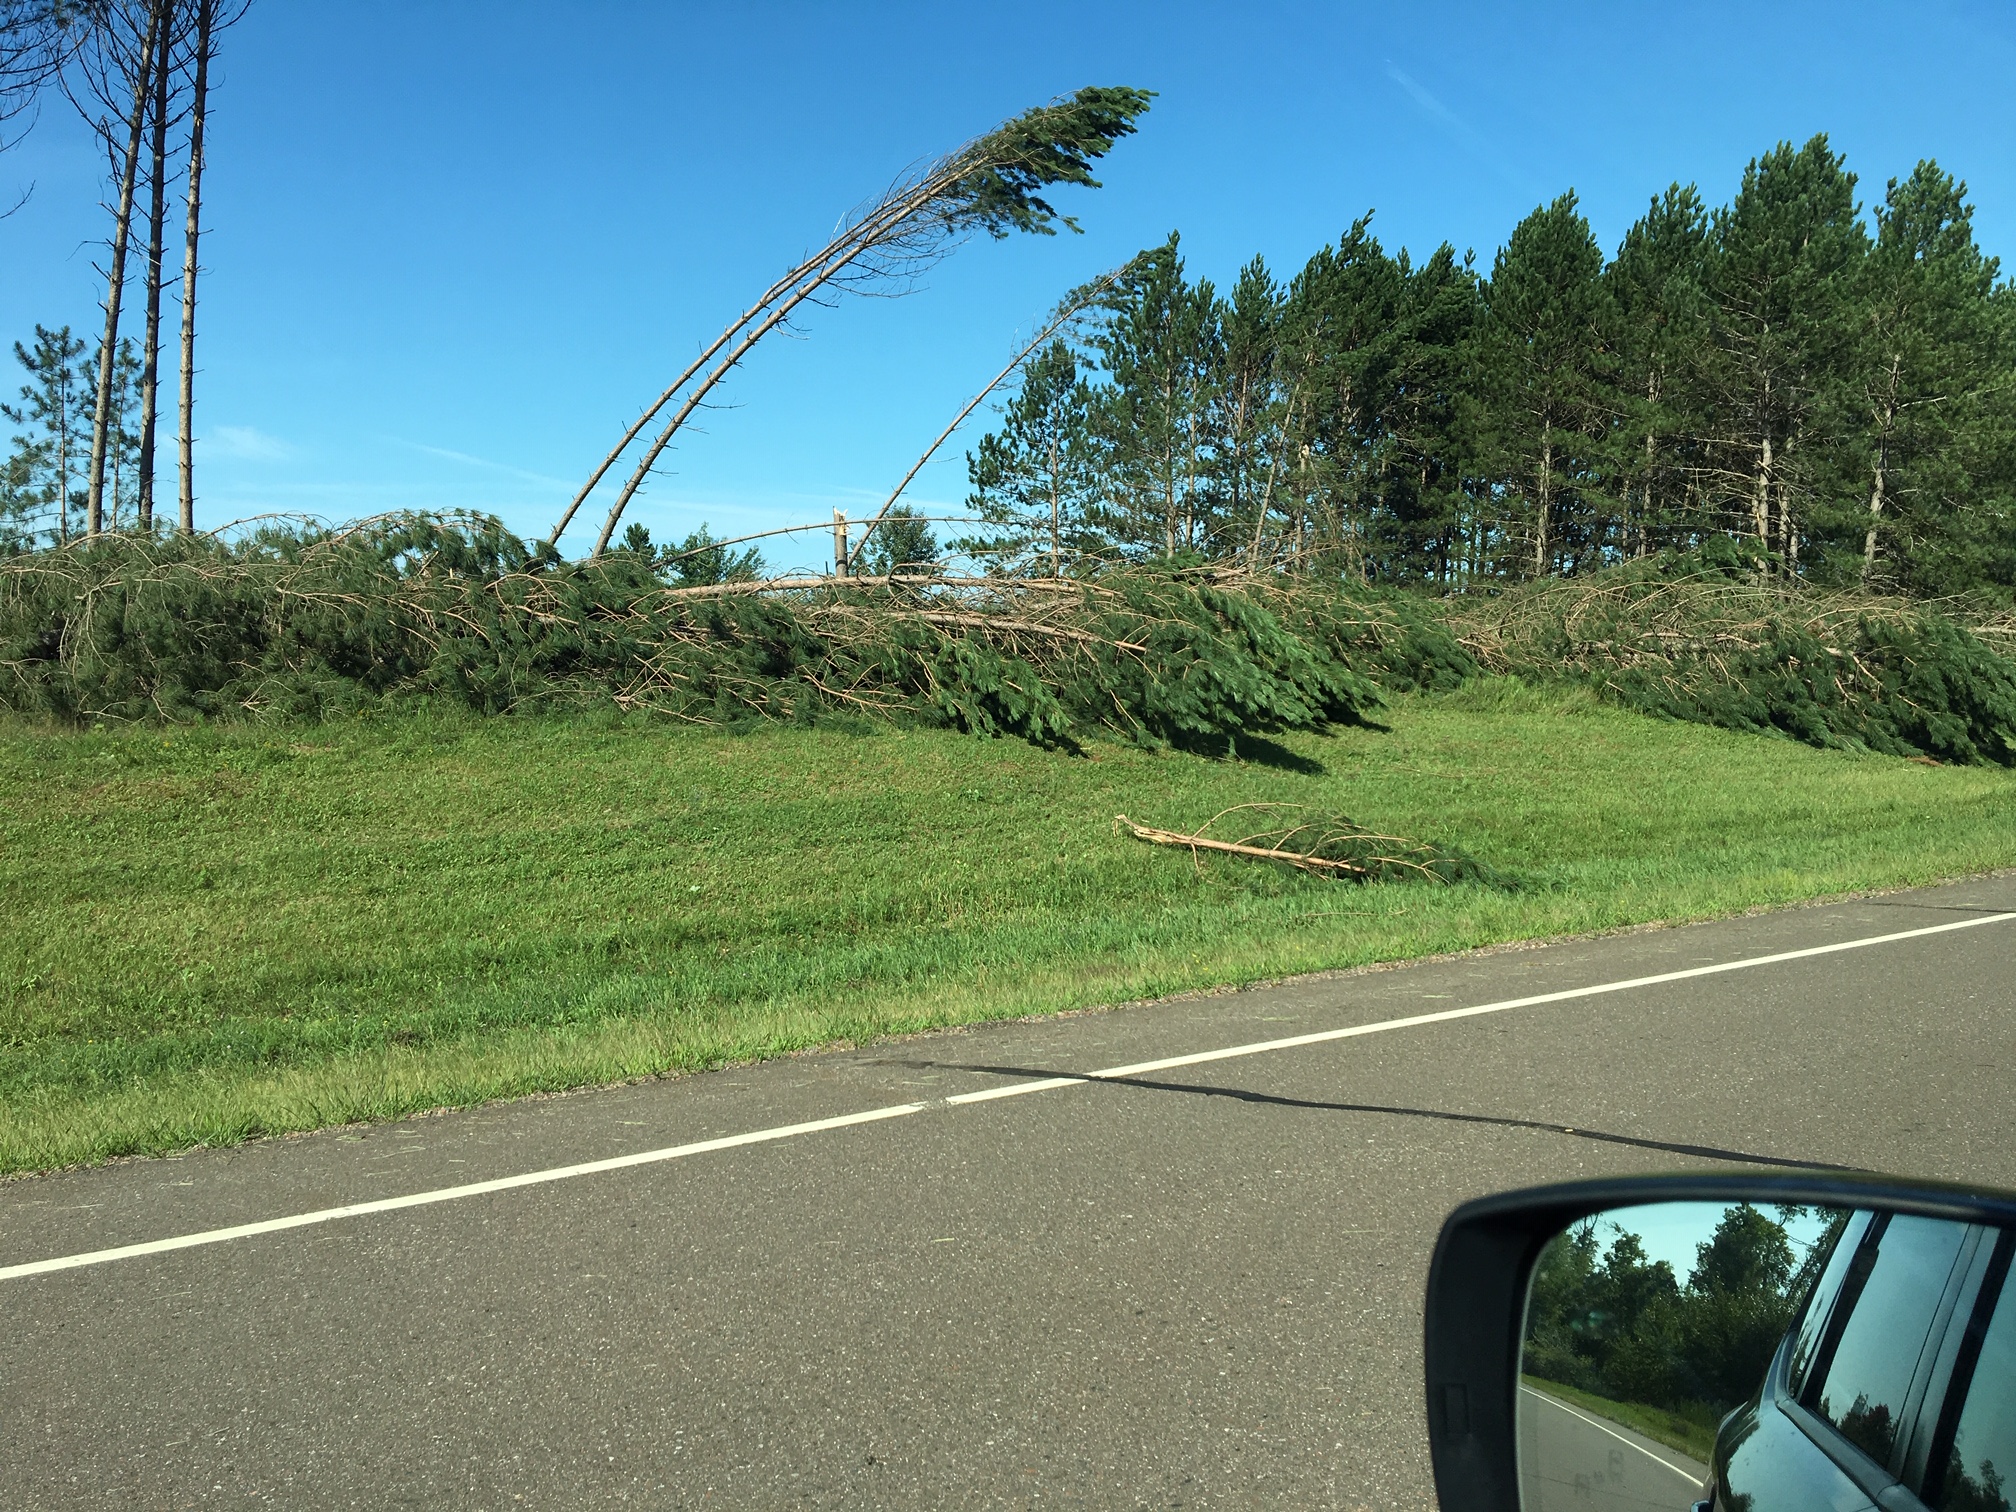 Numerous trees down west of Kerrick in northern Pine county, Minnesota